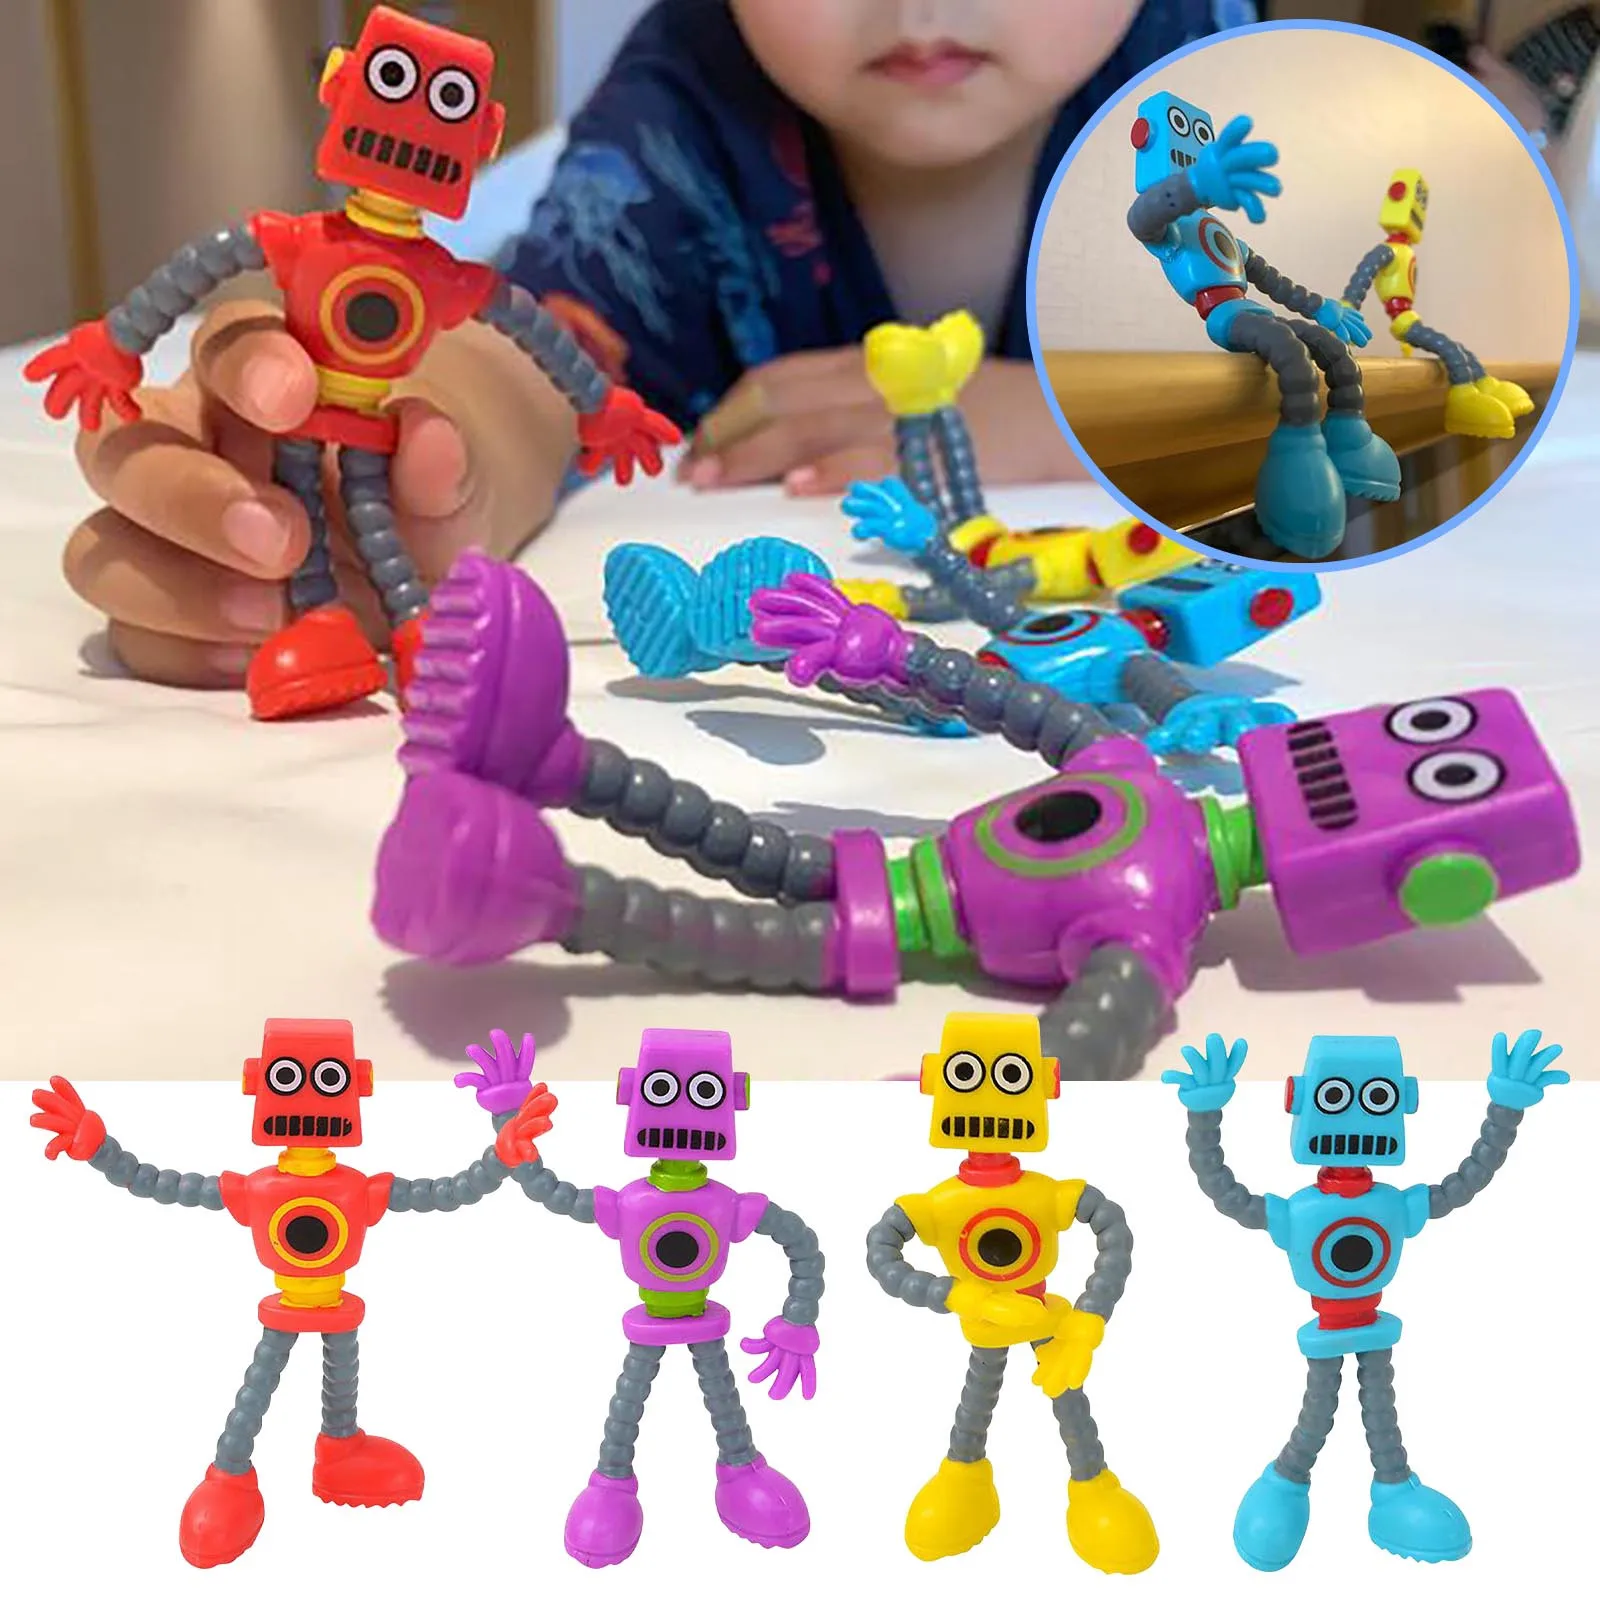 

Fidgets Toys Creative Wire Robot Twisted Deformed Ever-Changing Doll Fun Decompression Tricky Children Toy Christmas Gift 2022